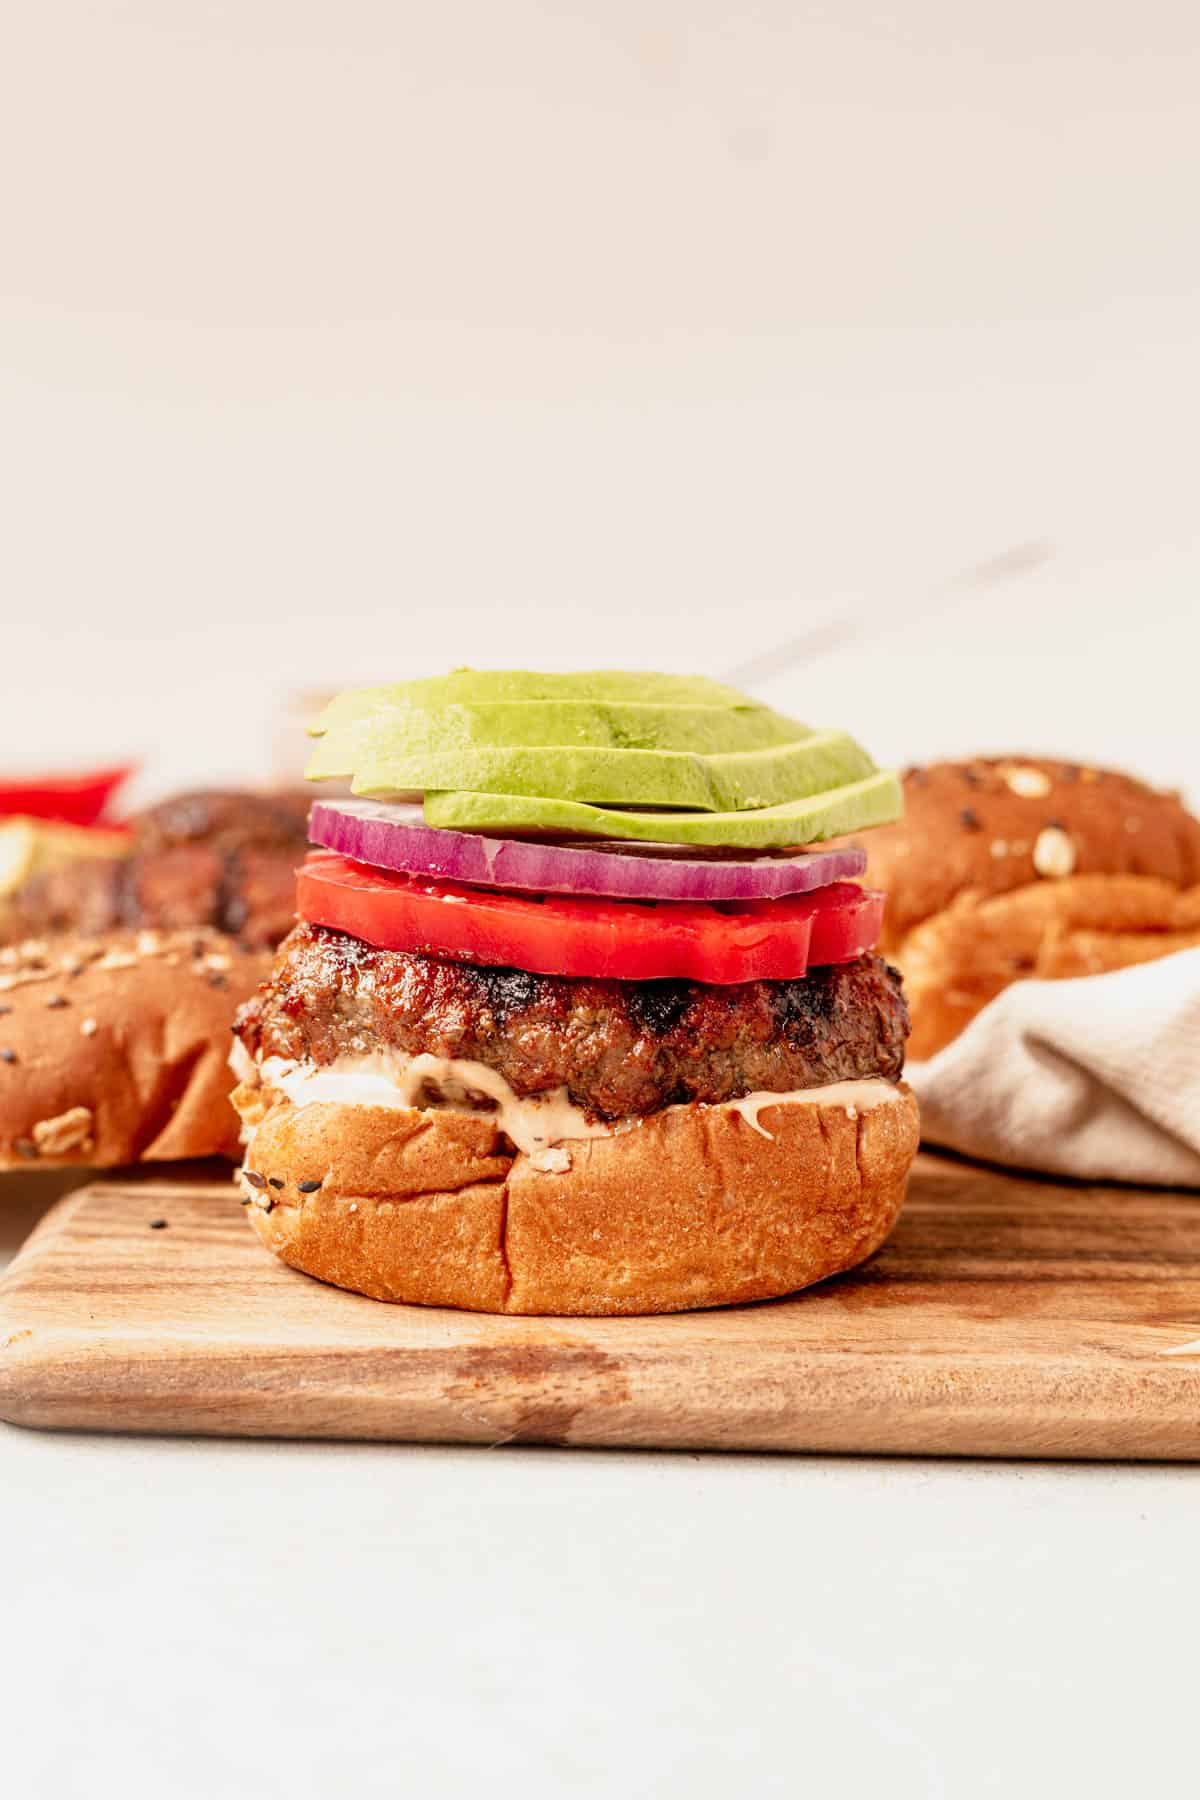 grilled burger with avocado and tomato on top